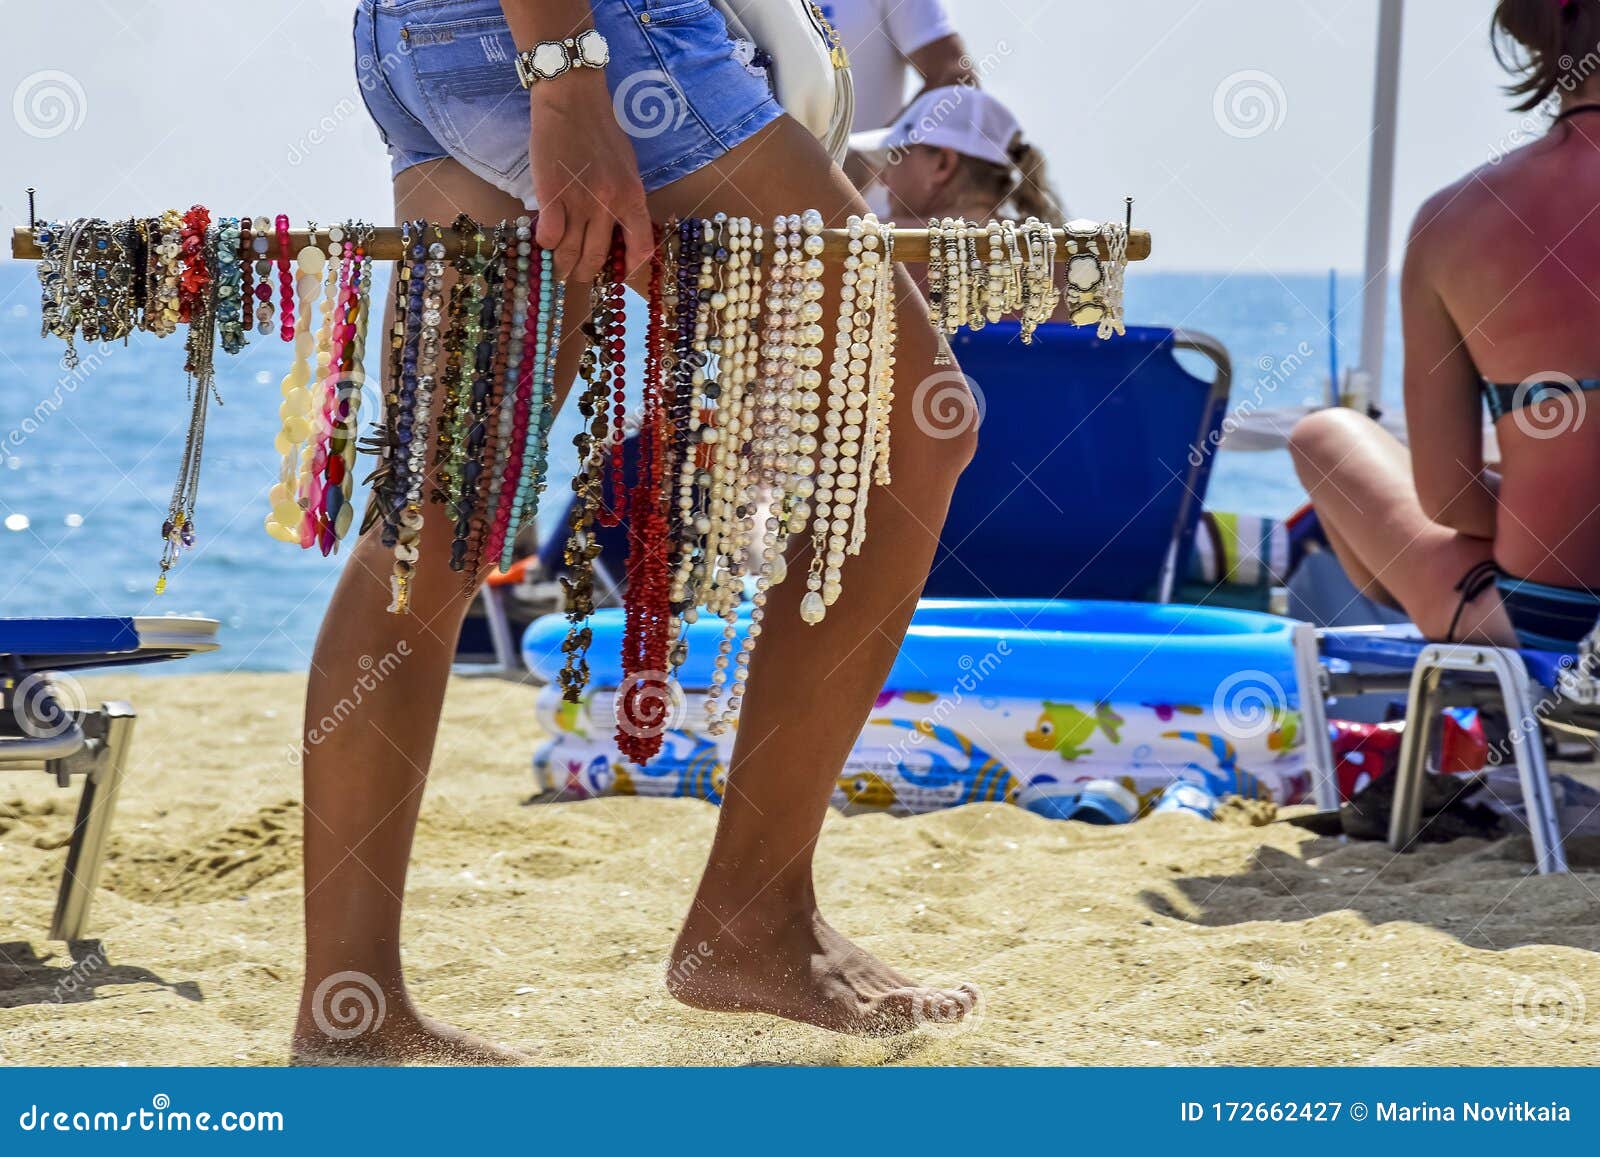 Summer Vacation Holiday Legs Of Girl Selling Jewelry On Beach